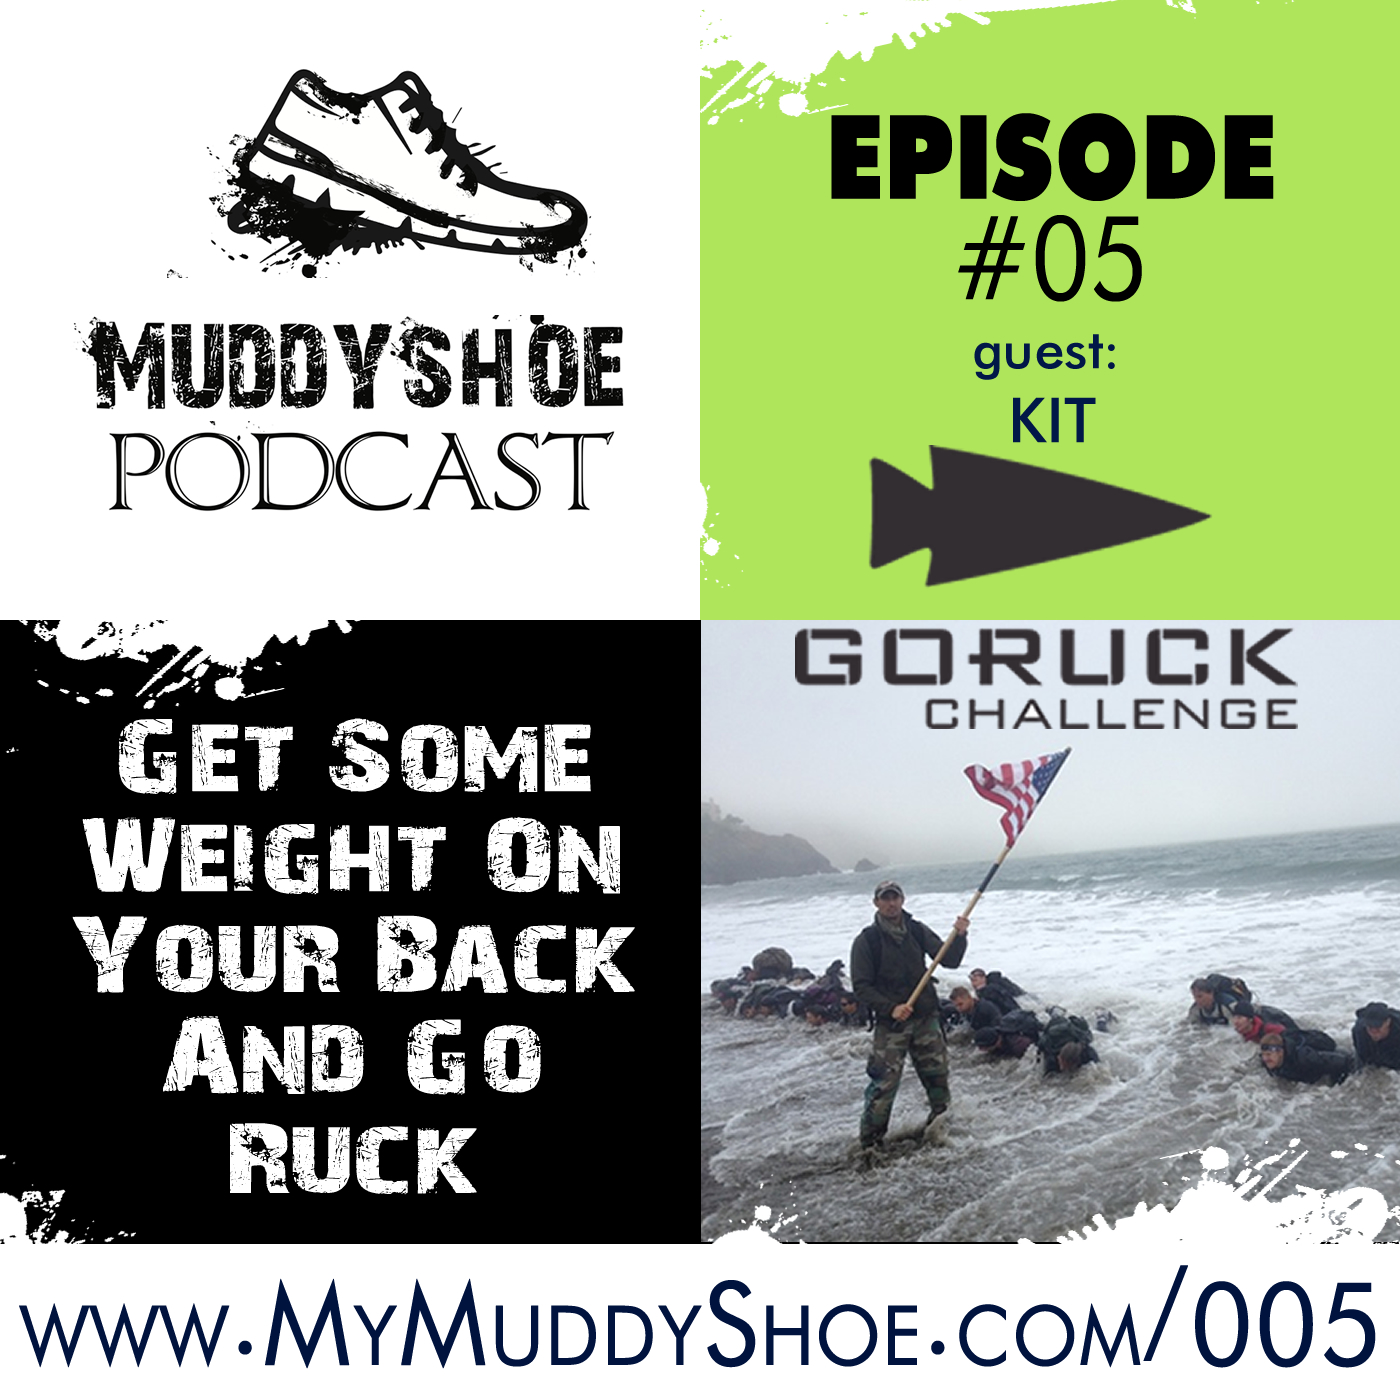 The Muddy Shoe #005 - Get Some Weight On Your Back And Go Ruck!